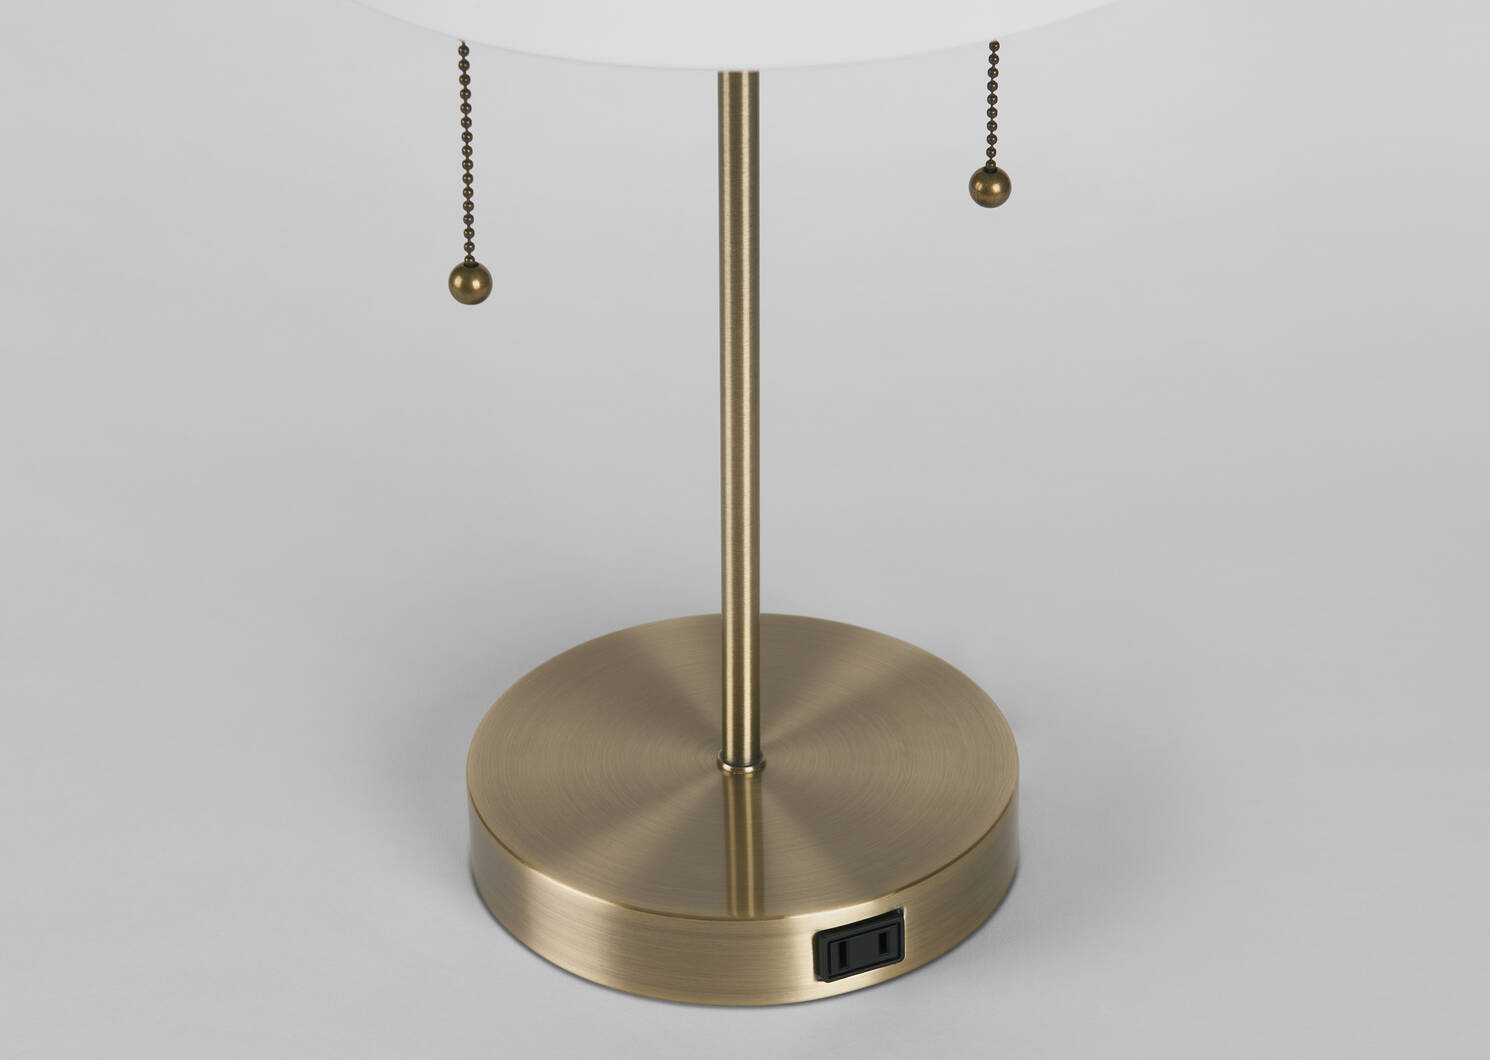 Keeley Table Lamp White